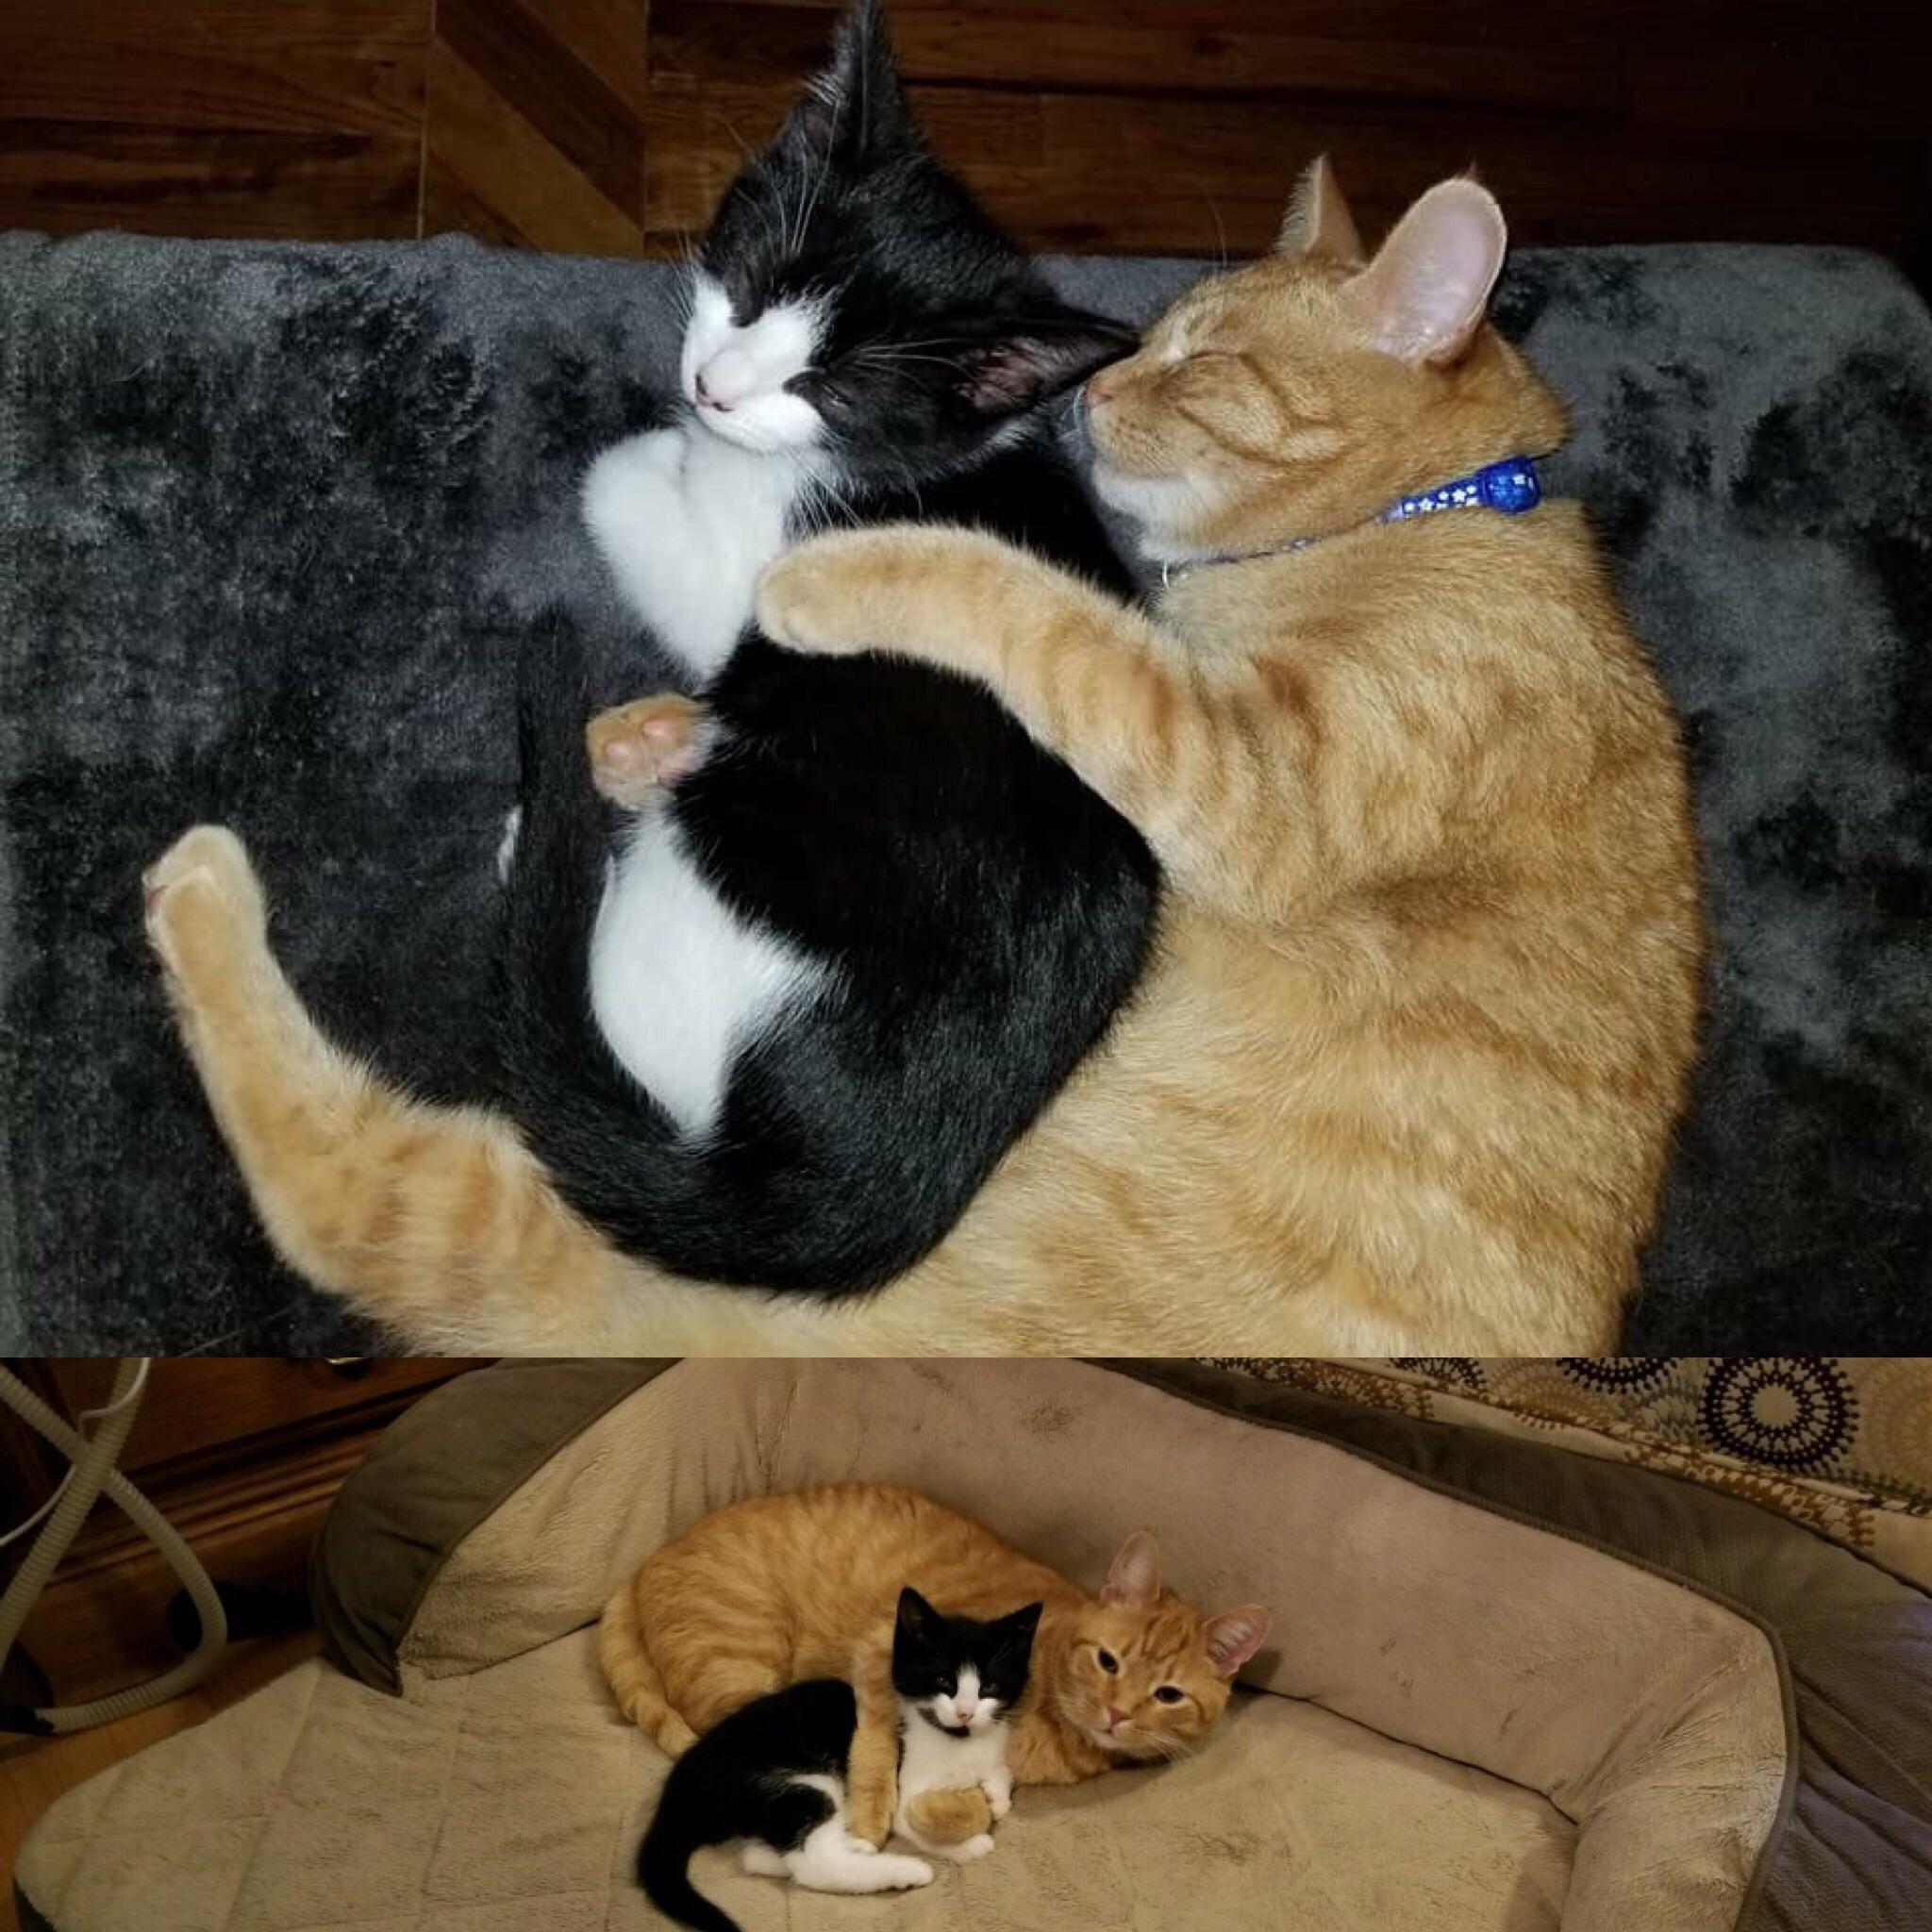 one month later the orange cat still loves his kitten friend : cats